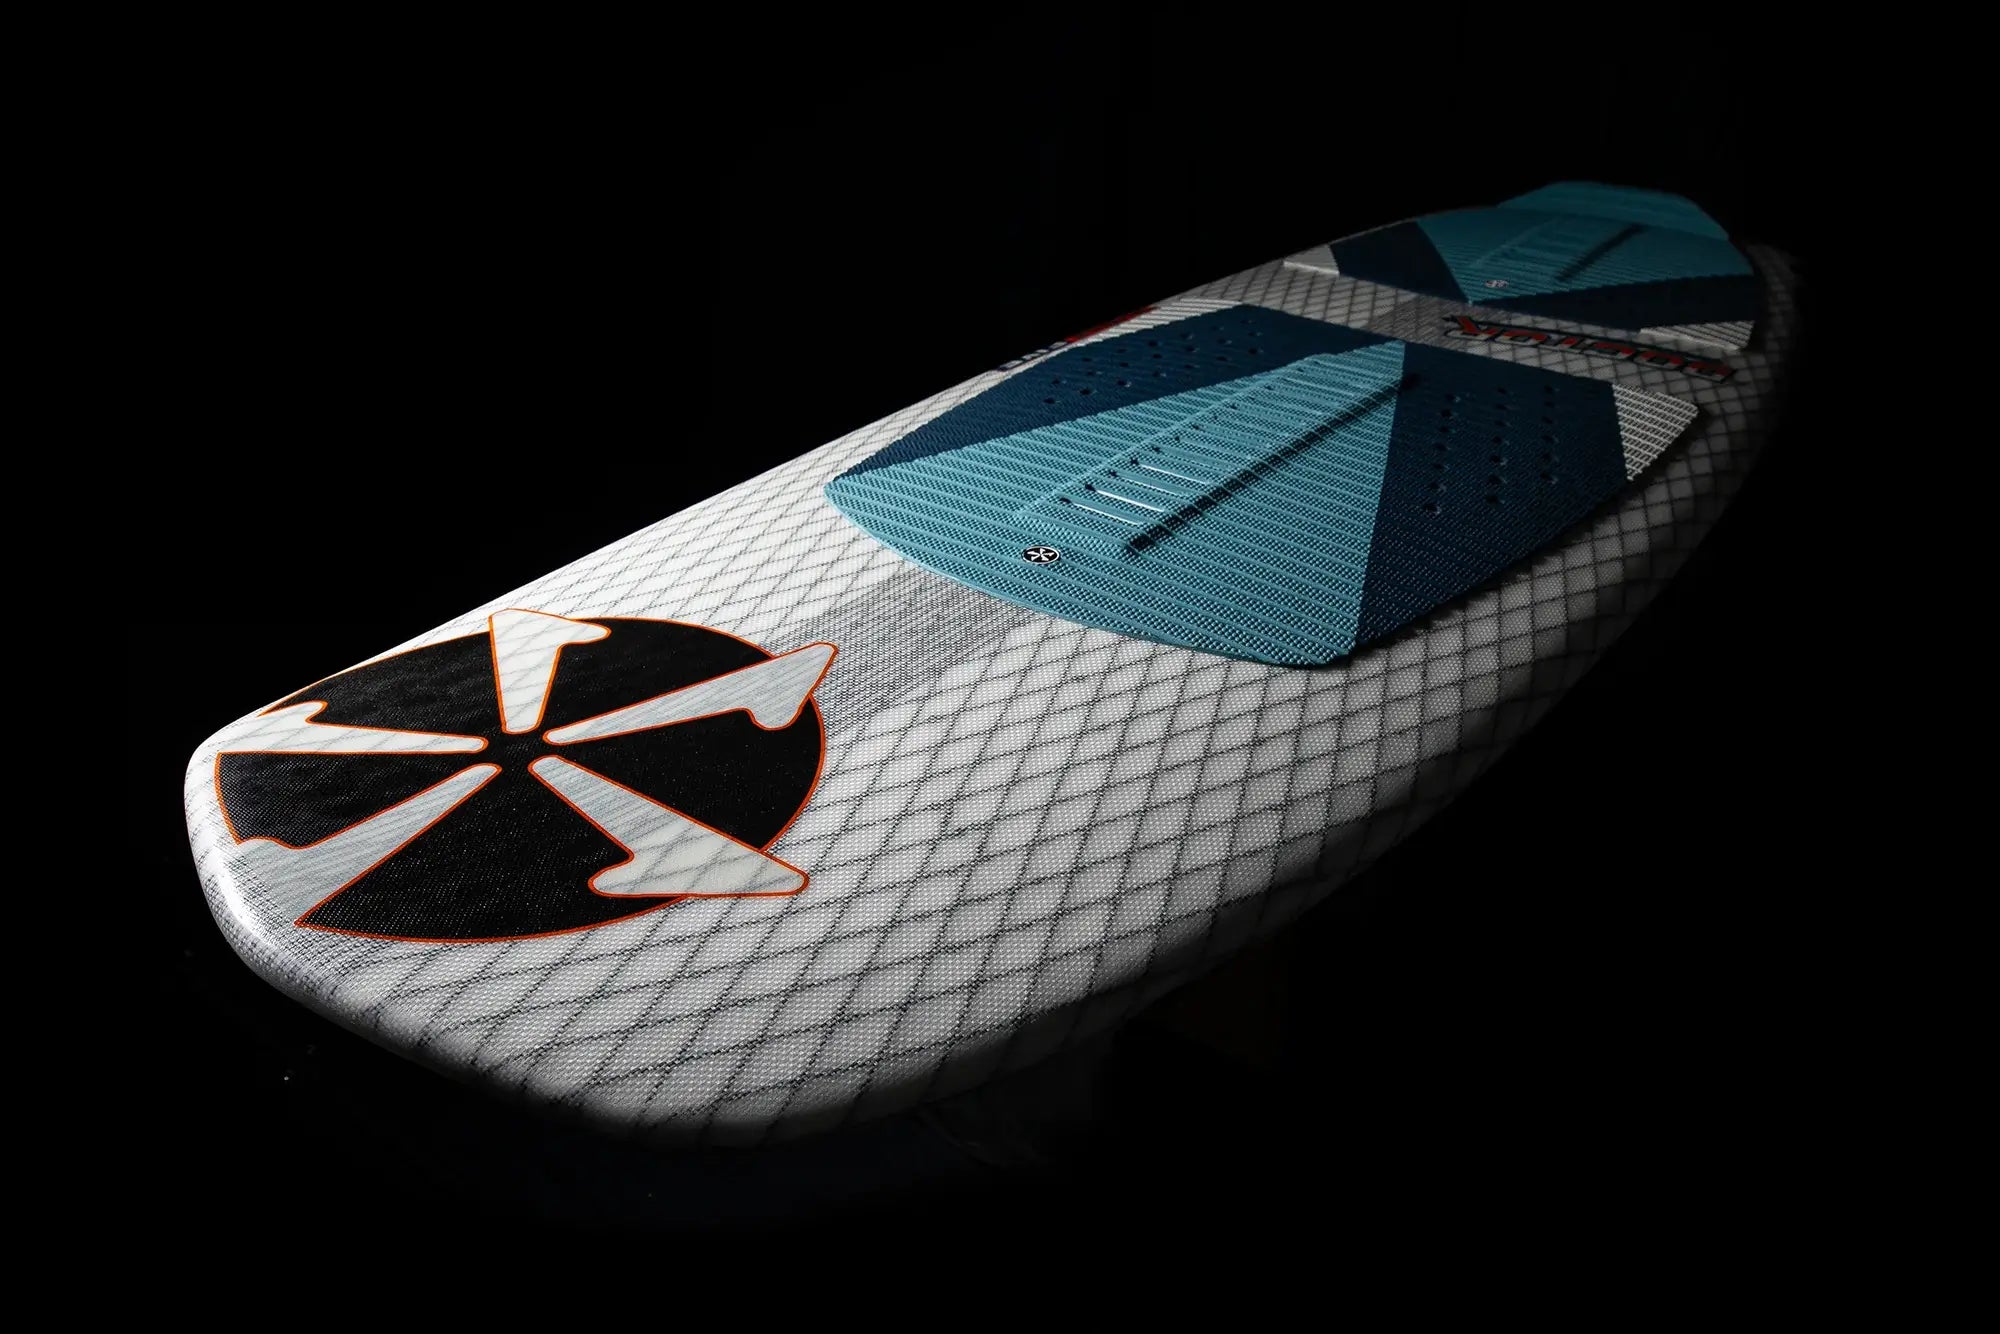 An experienced rider showcasing their Phase 5 2024 Doctor Wakesurf Board, demonstrating exceptional stability and board control against a dramatic black background.